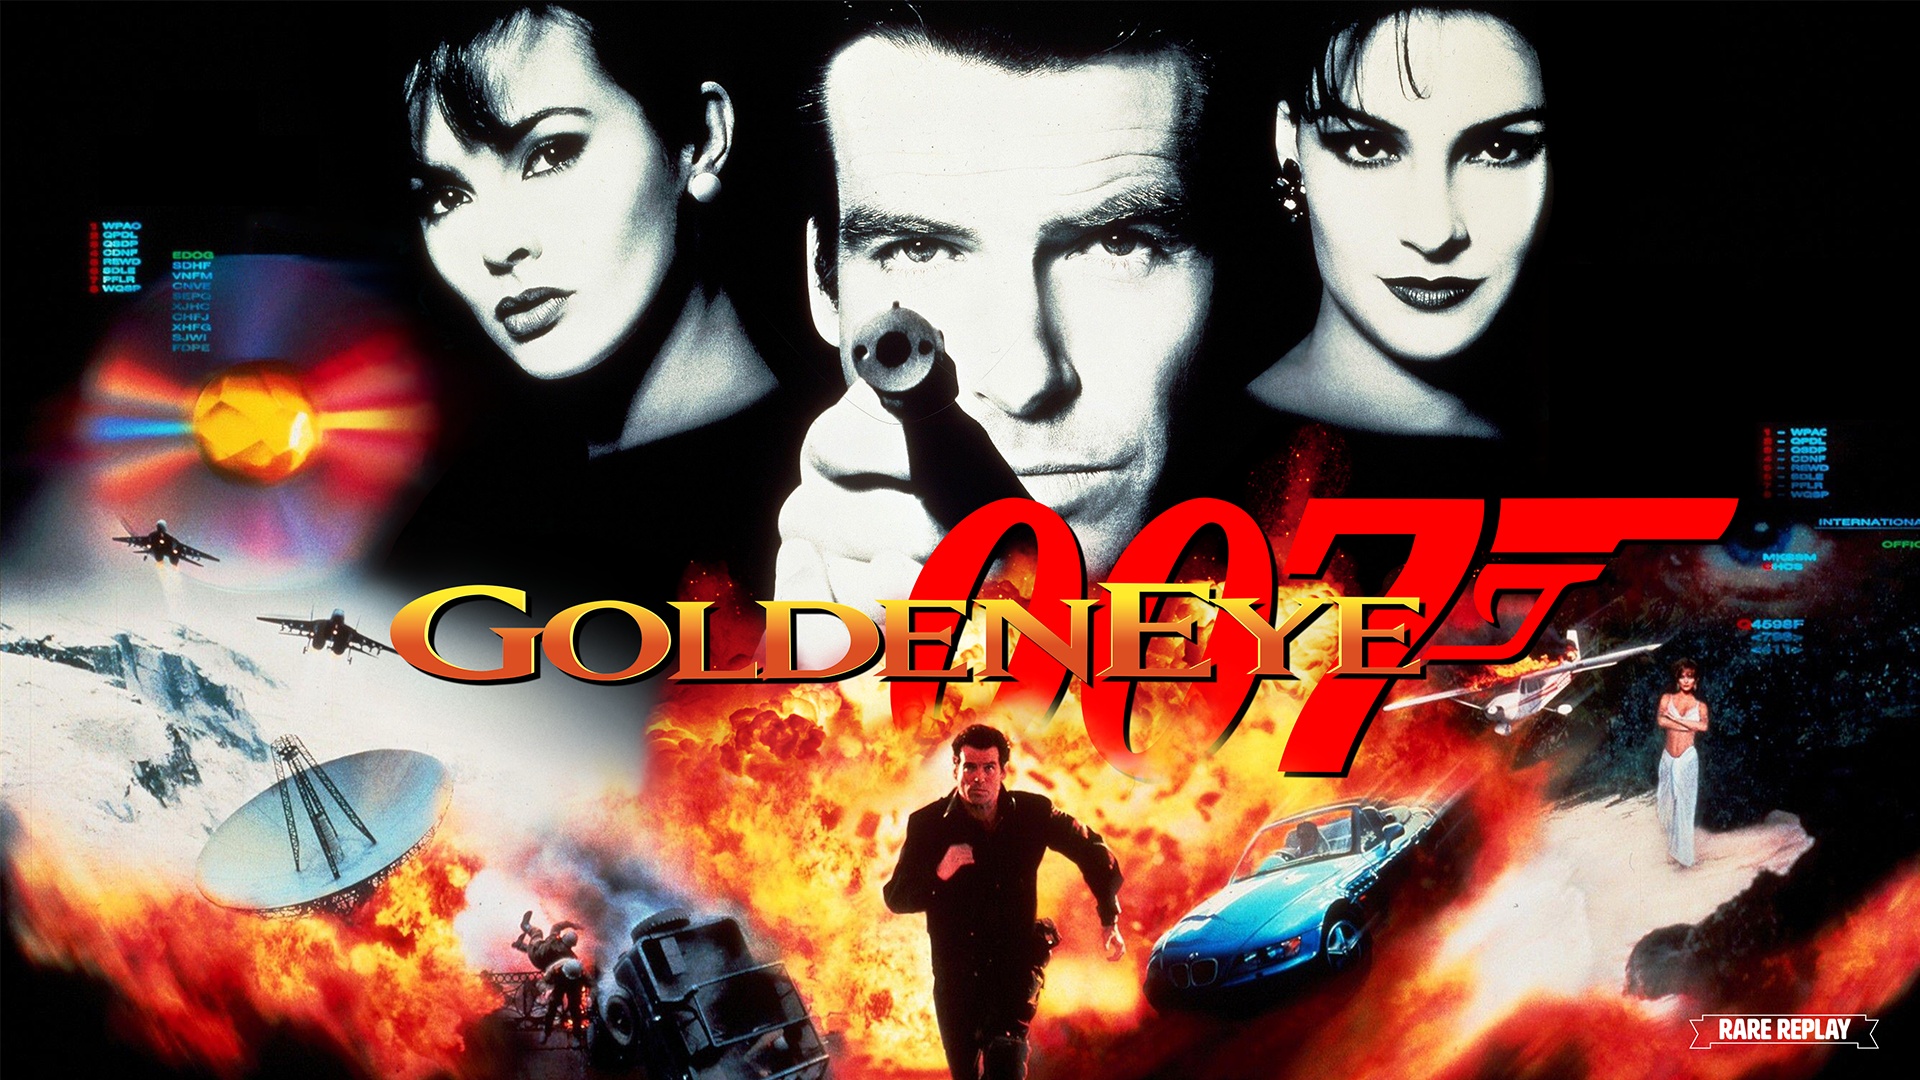 Video For James Bond Returns as GoldenEye 007 Sets Its Sights on Xbox Game Pass